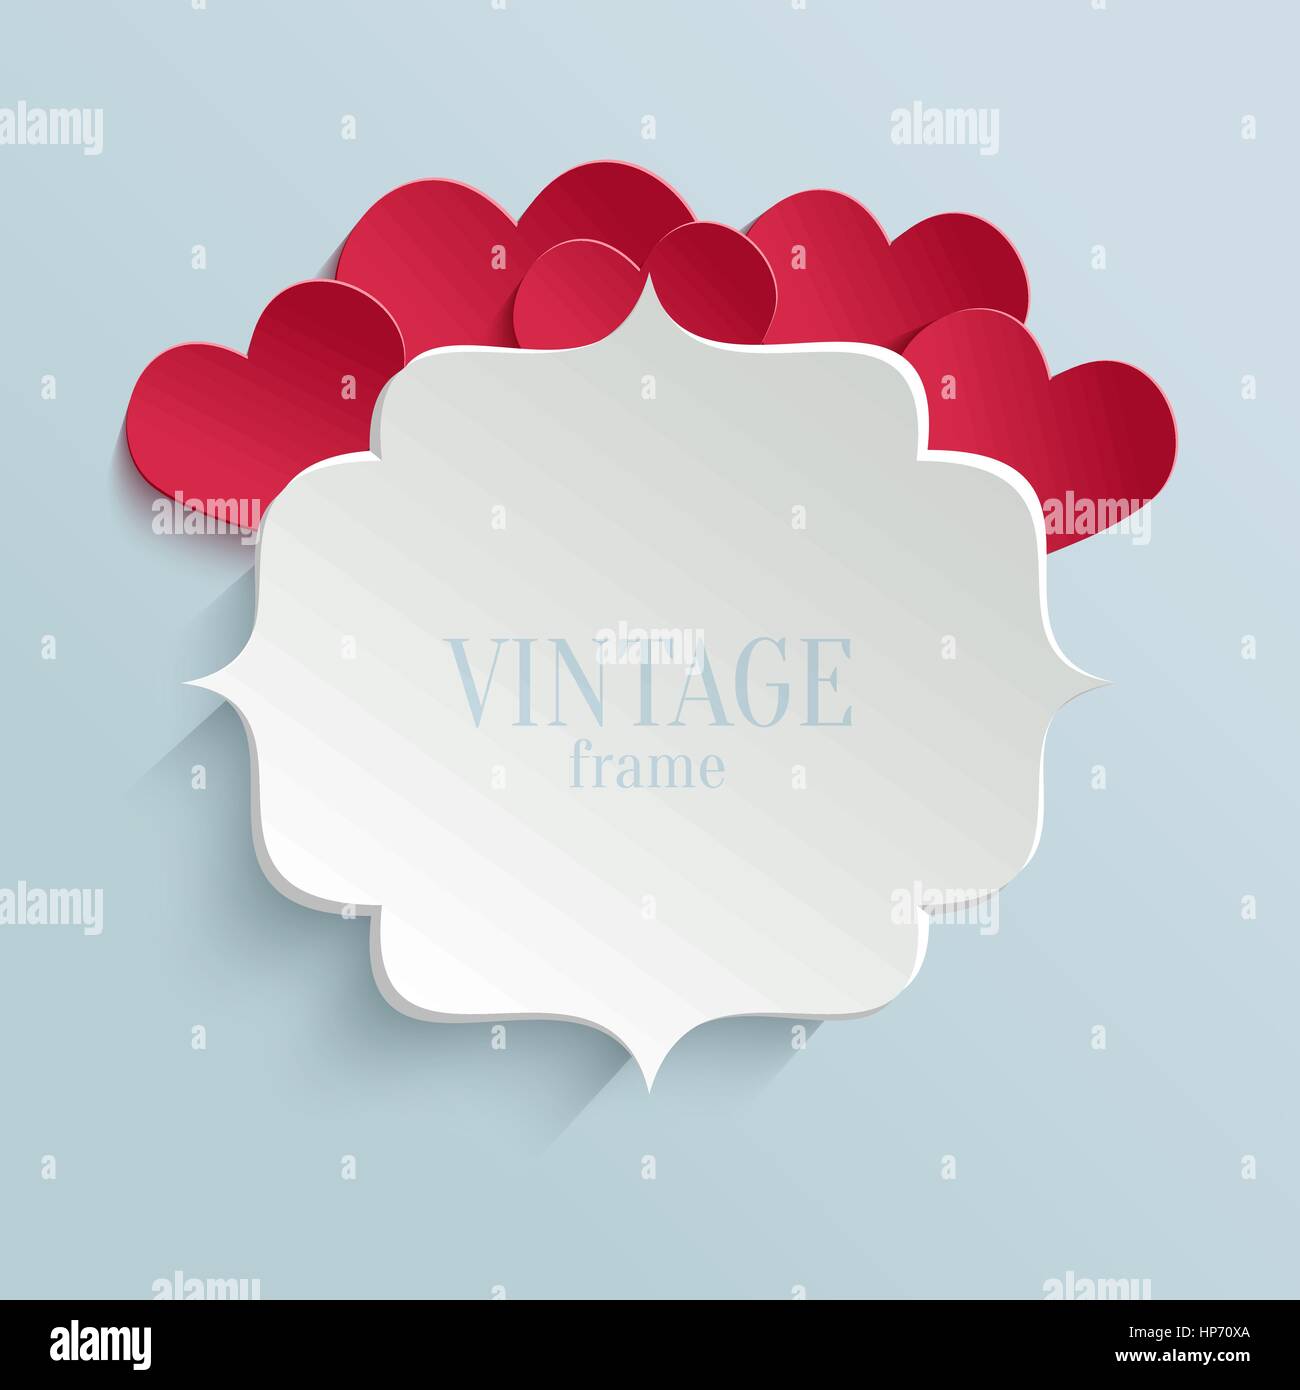 White paper banner in vintage or retro style with red hearts. Valentines day greeting card template Stock Vector